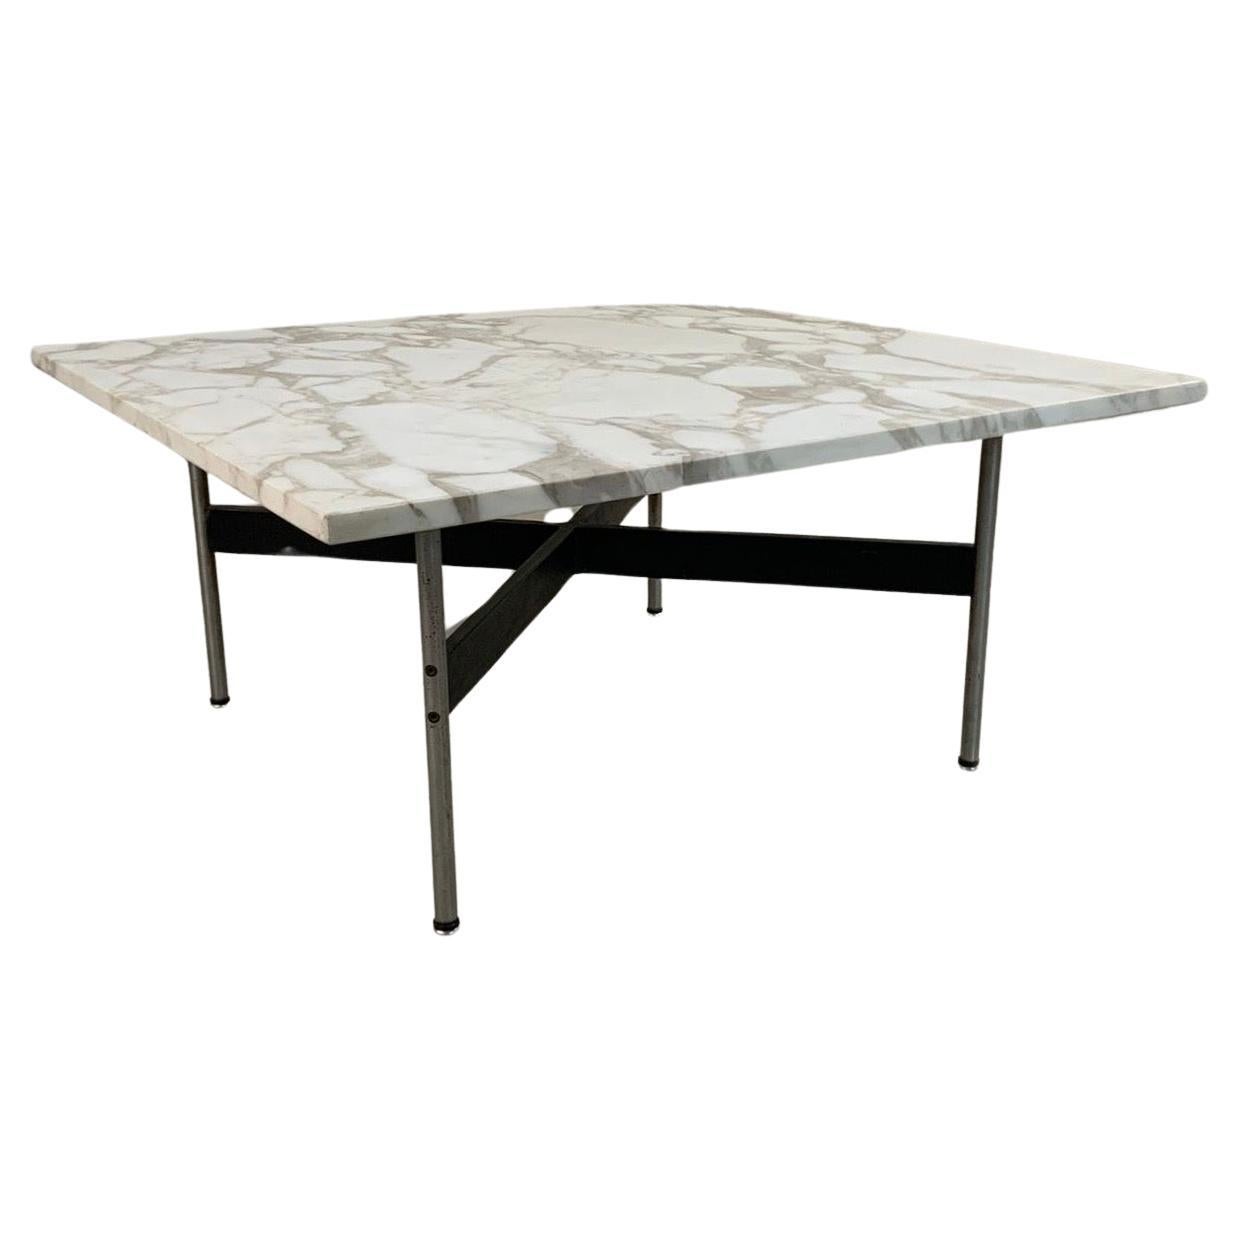 Marble low table by W. Katavolos, R. Little and D. Kelley by ICF, italy, 1970s For Sale